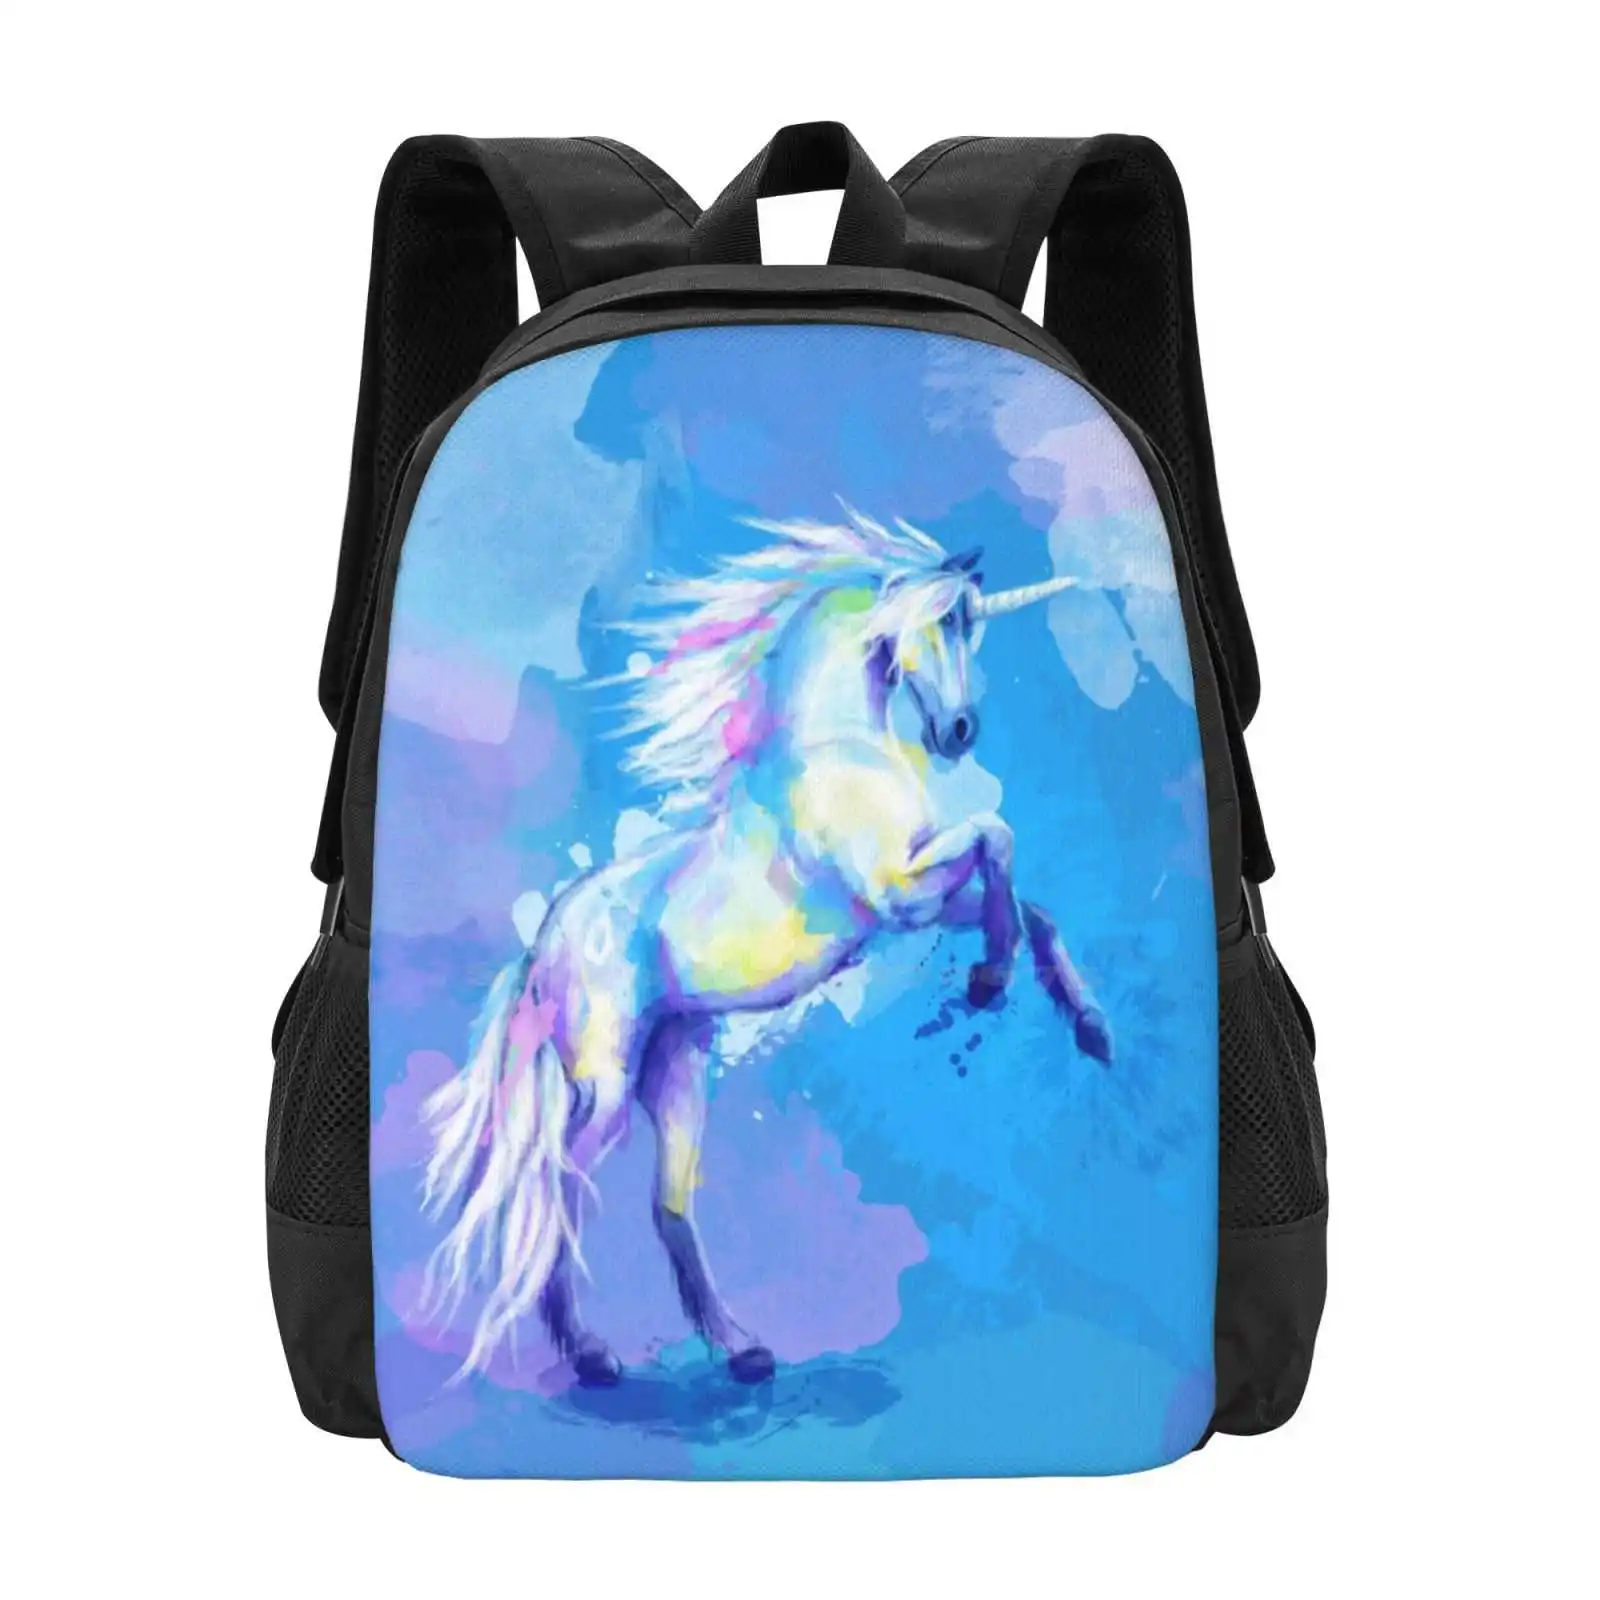 

Unicorn Dream-Fantasy Animal Painting Backpacks For School Teenagers Girls Travel Bags Watercolor Abstract Animal Mythical